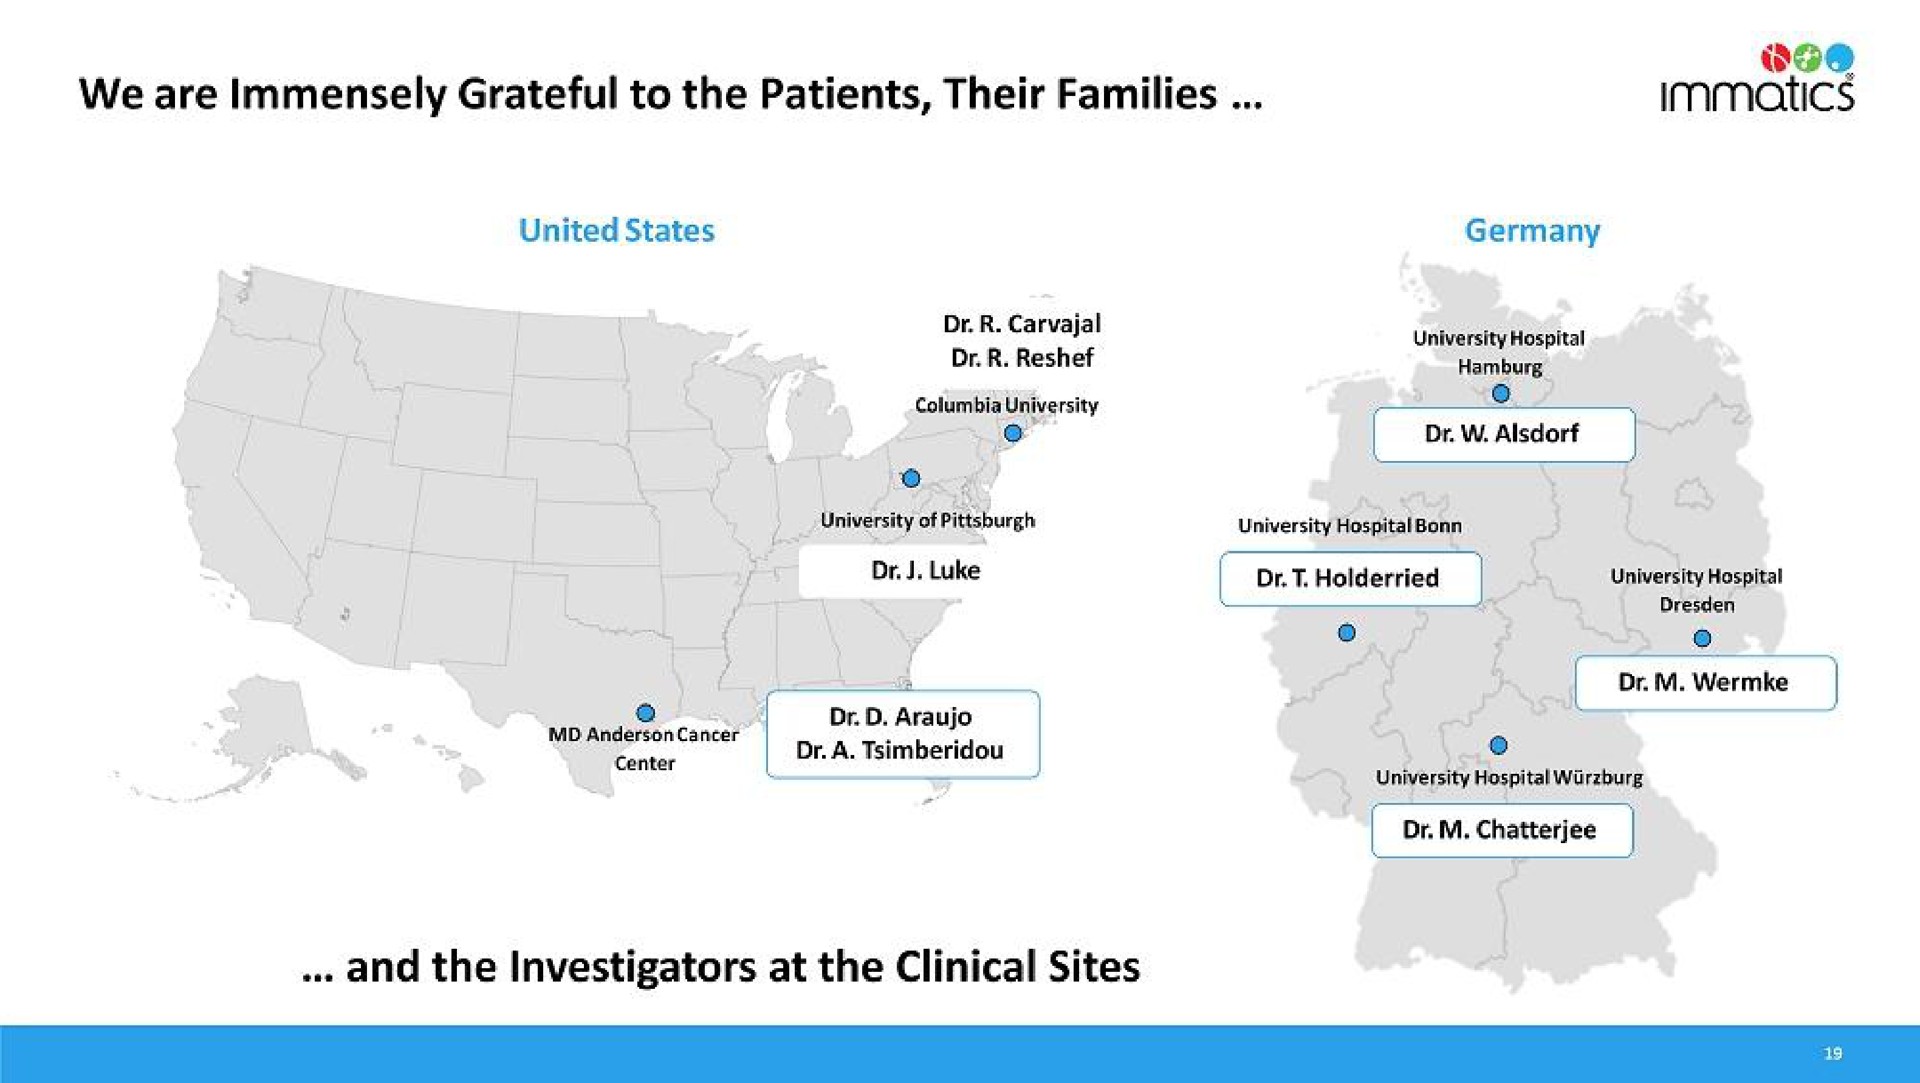 we are immensely grateful to the patients their families and the investigators at the clinical sites | Immatics